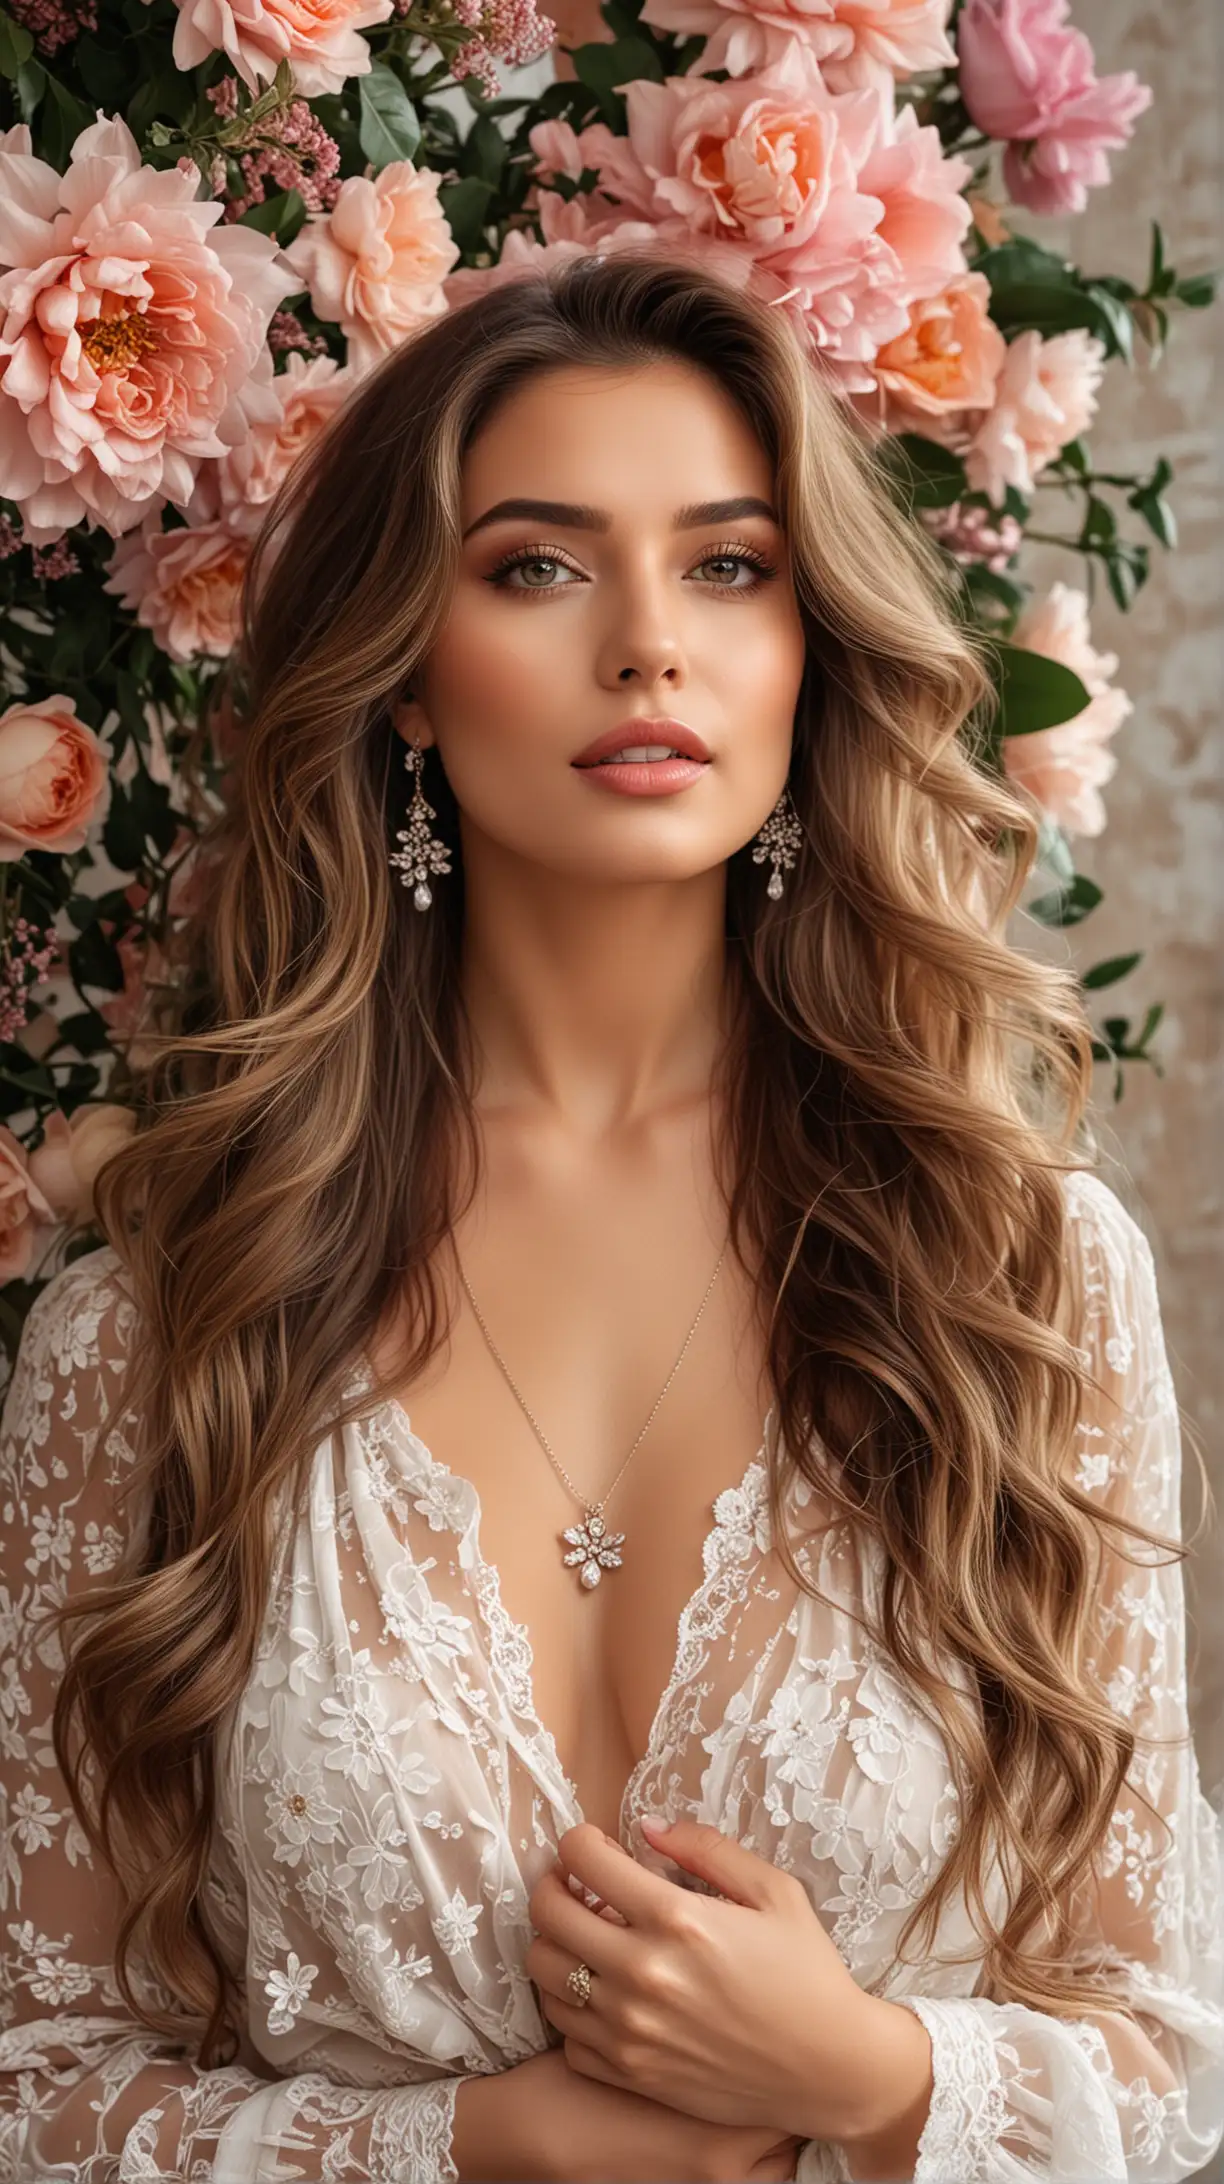 photoshoot with wall of flowers background of beautiful woman, dressed nicely with sheer blouse, nice jewelry, beautiful big nude lips, makeup, long  balayage wavy hair, with captivating eyes and a passionate expression, holding a big bouquet of flowers to her chest, ultra-realistic